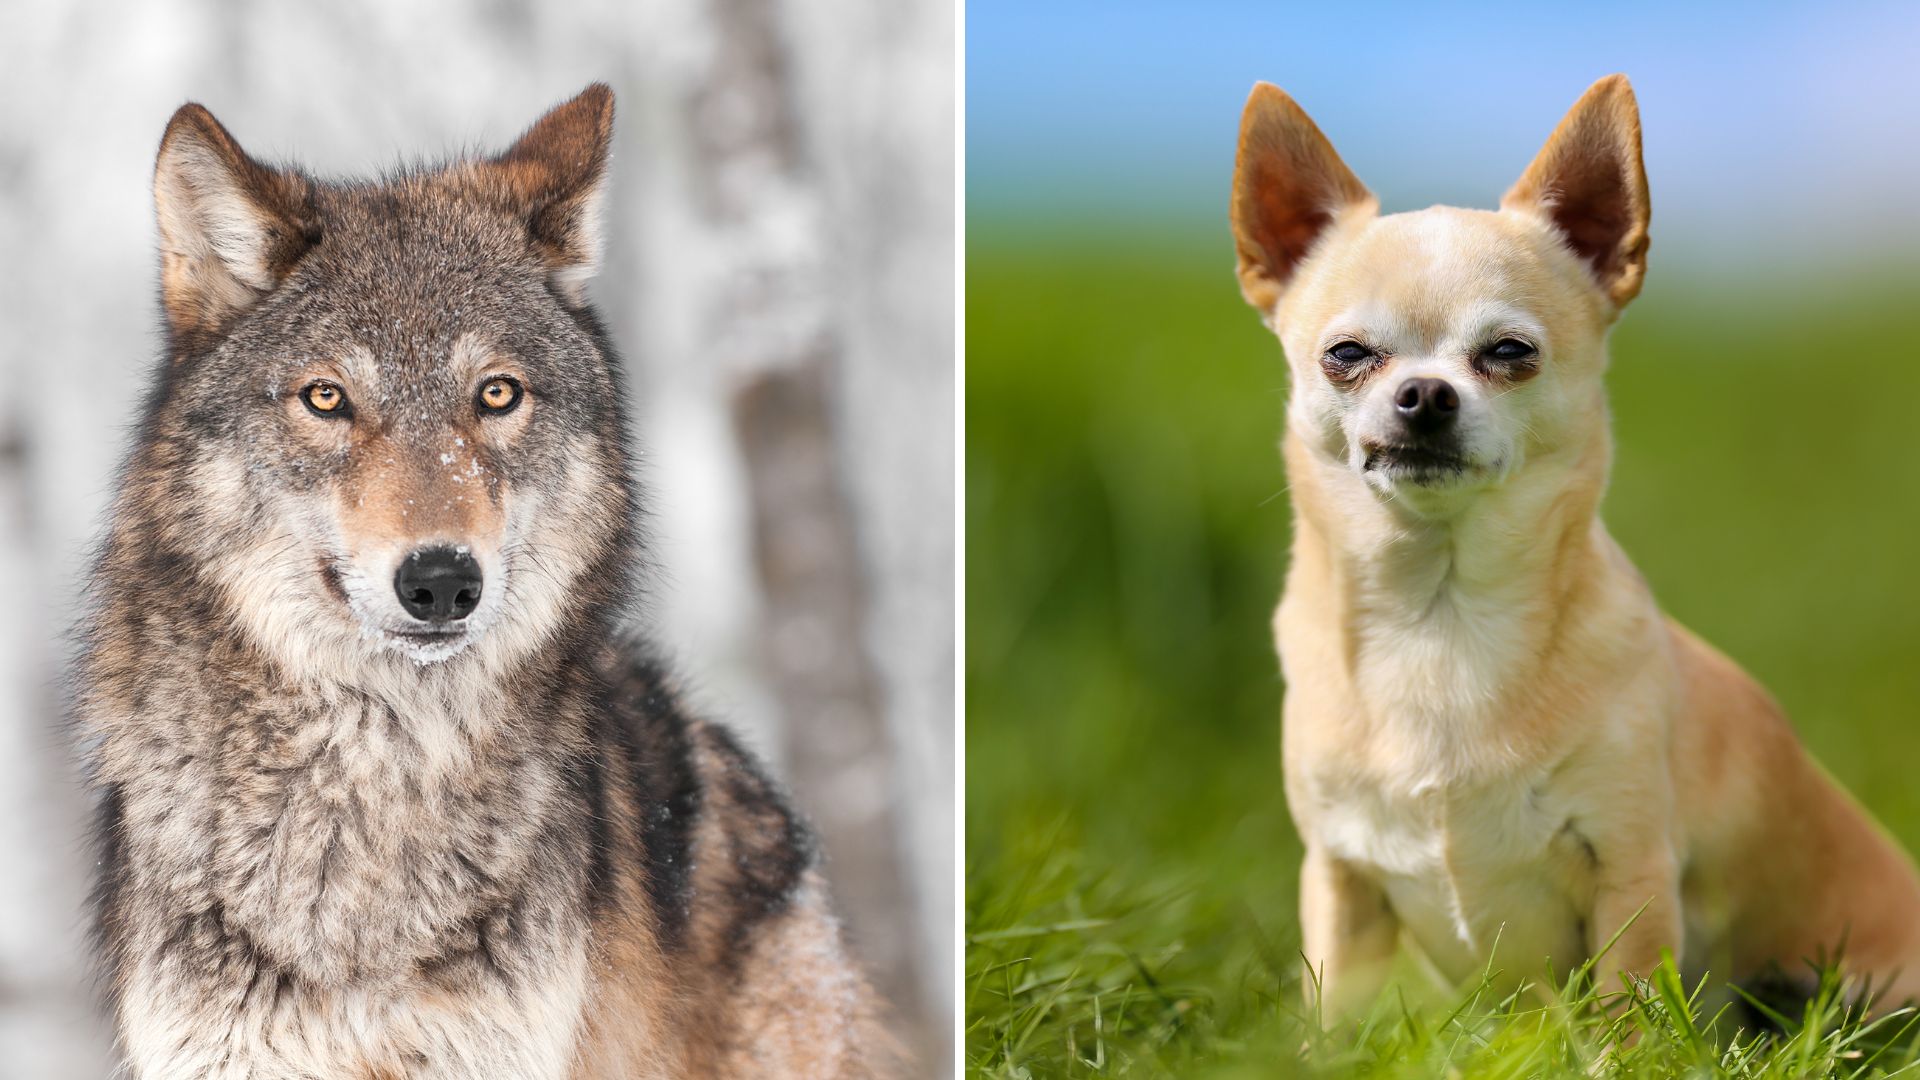 On the left is a picture of a golden-eyed gray wolf in the snow. On the right is a small but fierce tan chihuahua.